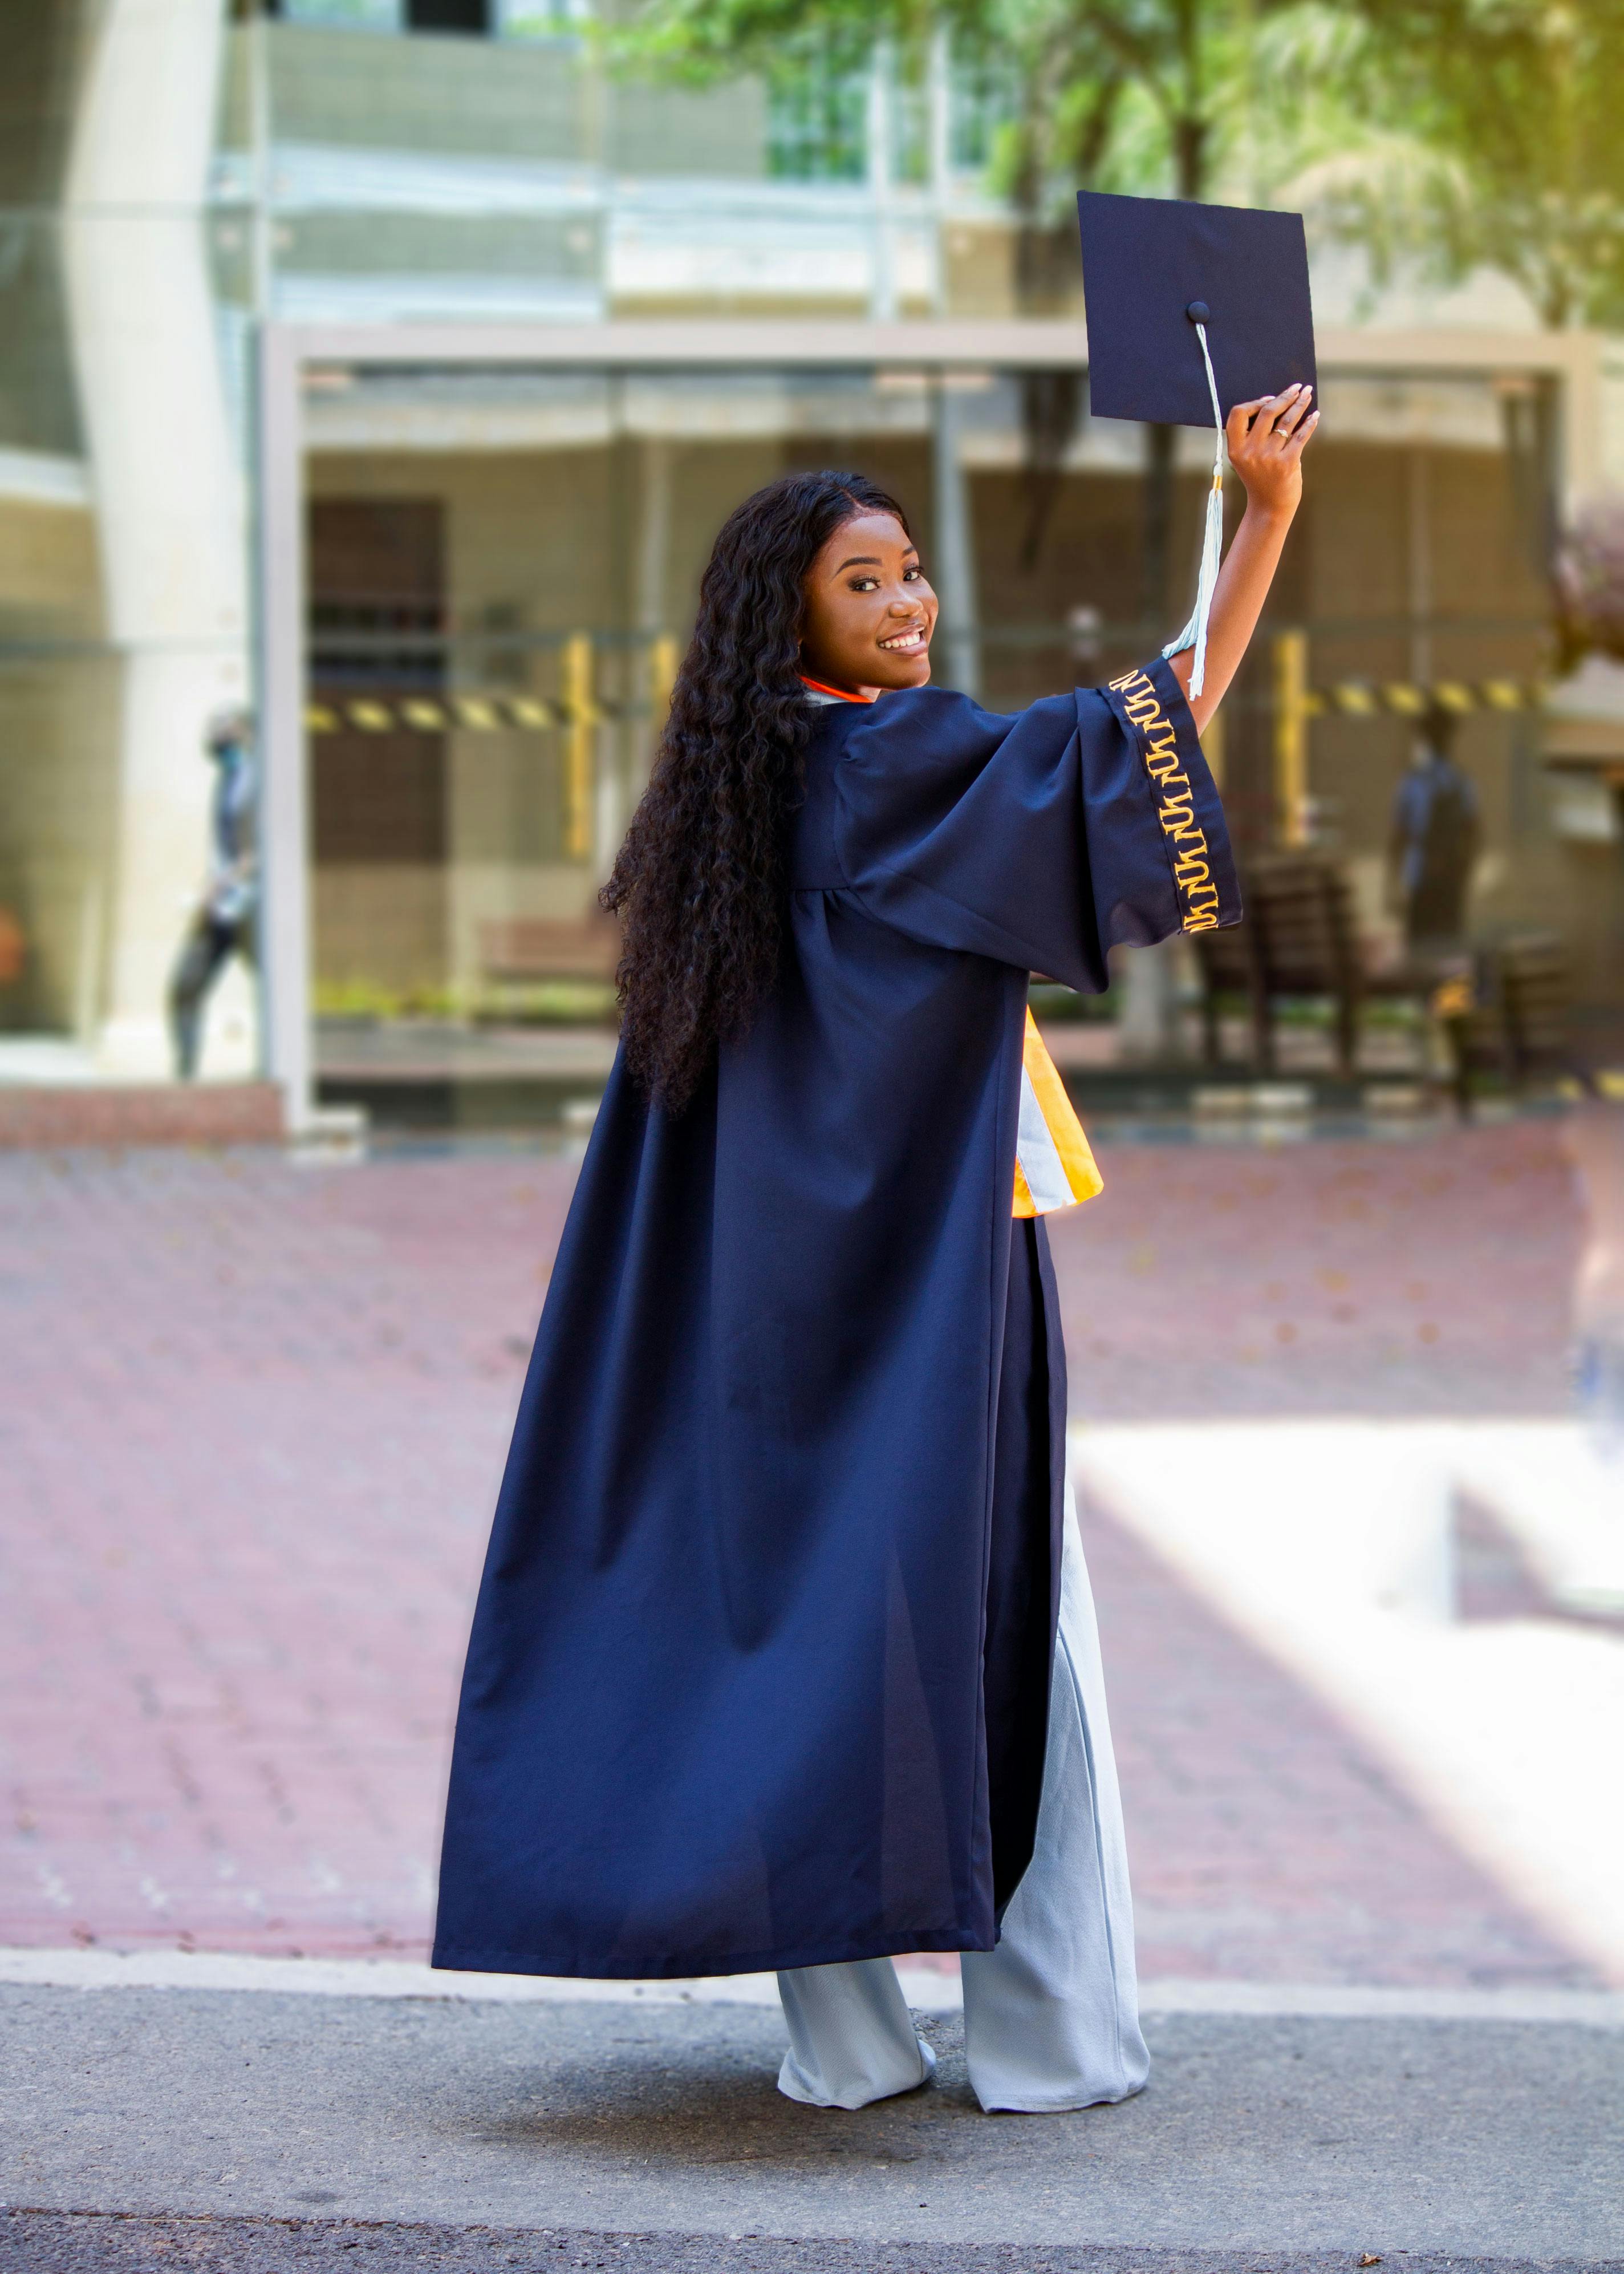 Graduation Gown Stock Photos, Images and Backgrounds for Free Download